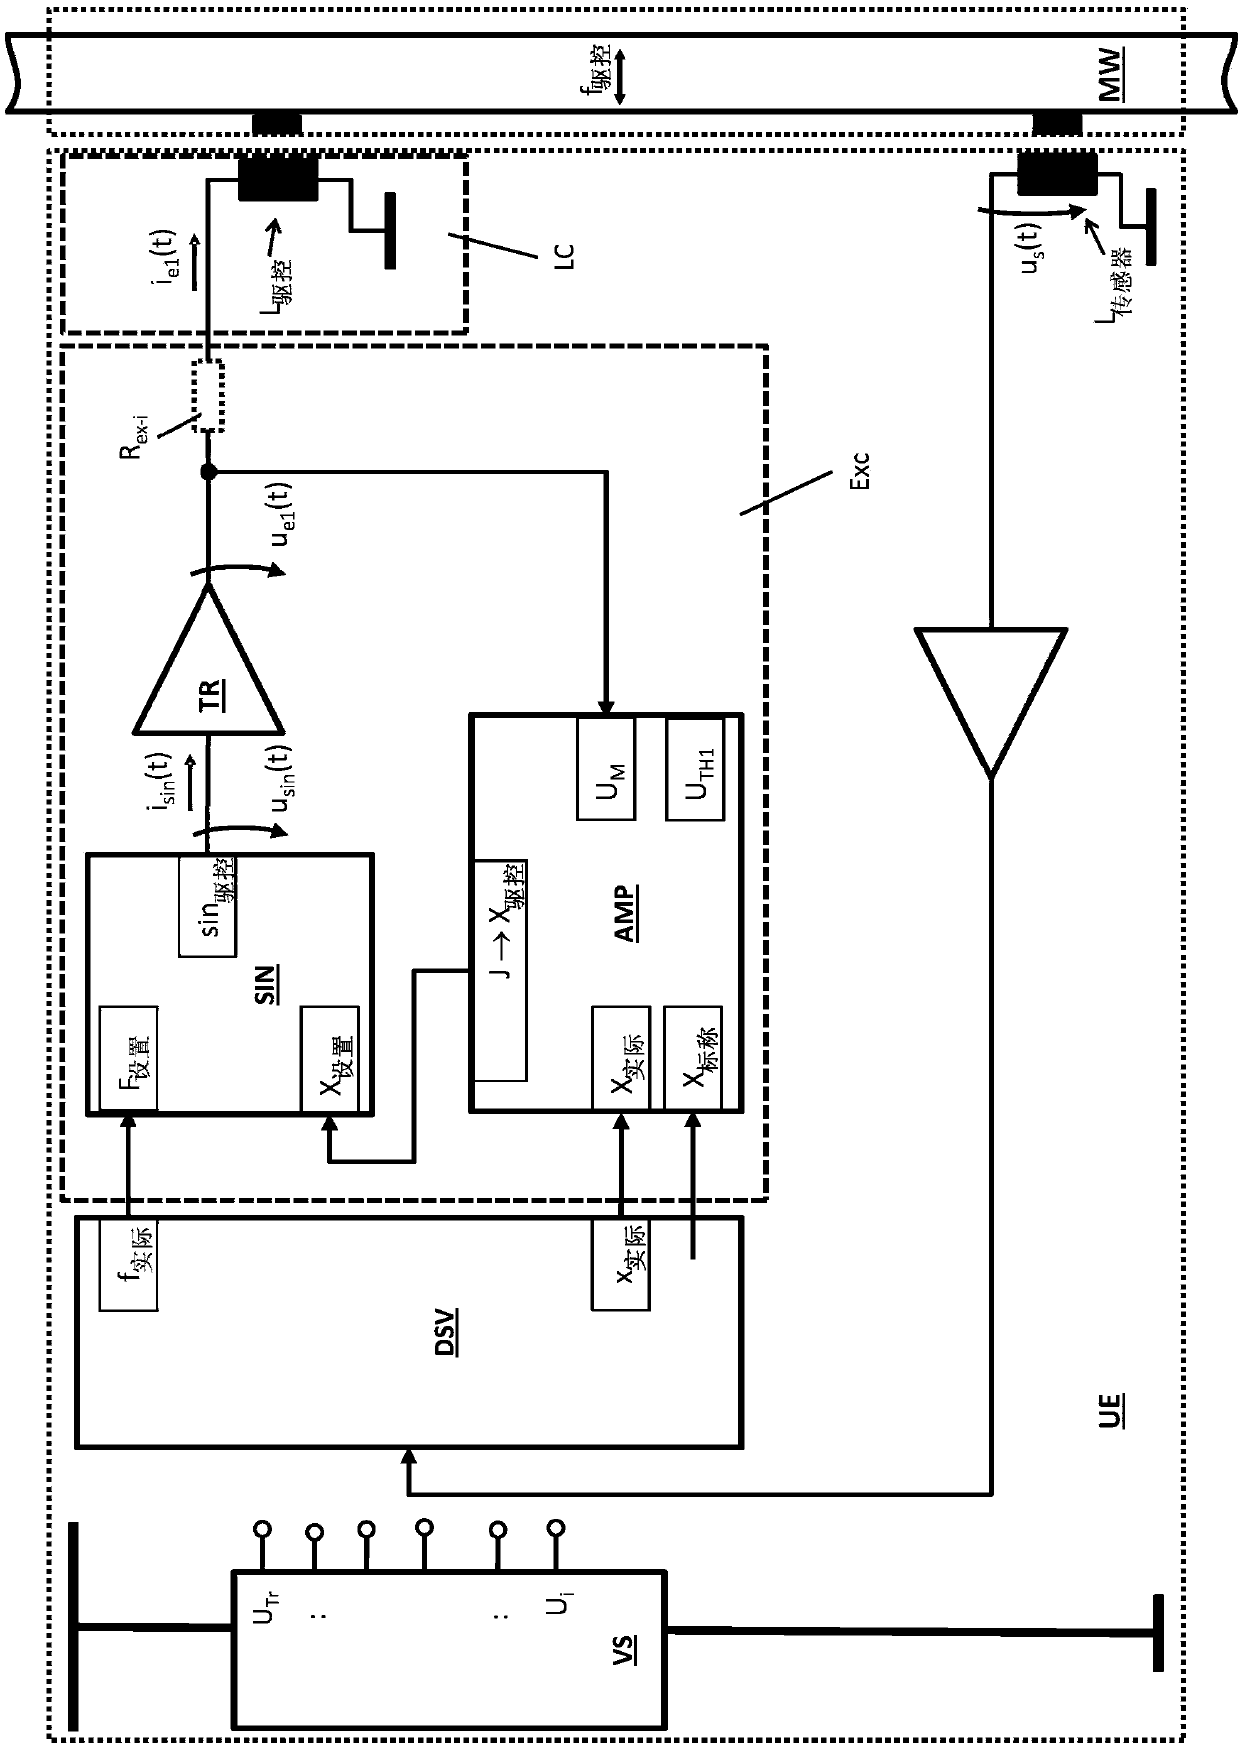 Driver circuit, converter electronics formed therewith and measuring system formed therewith